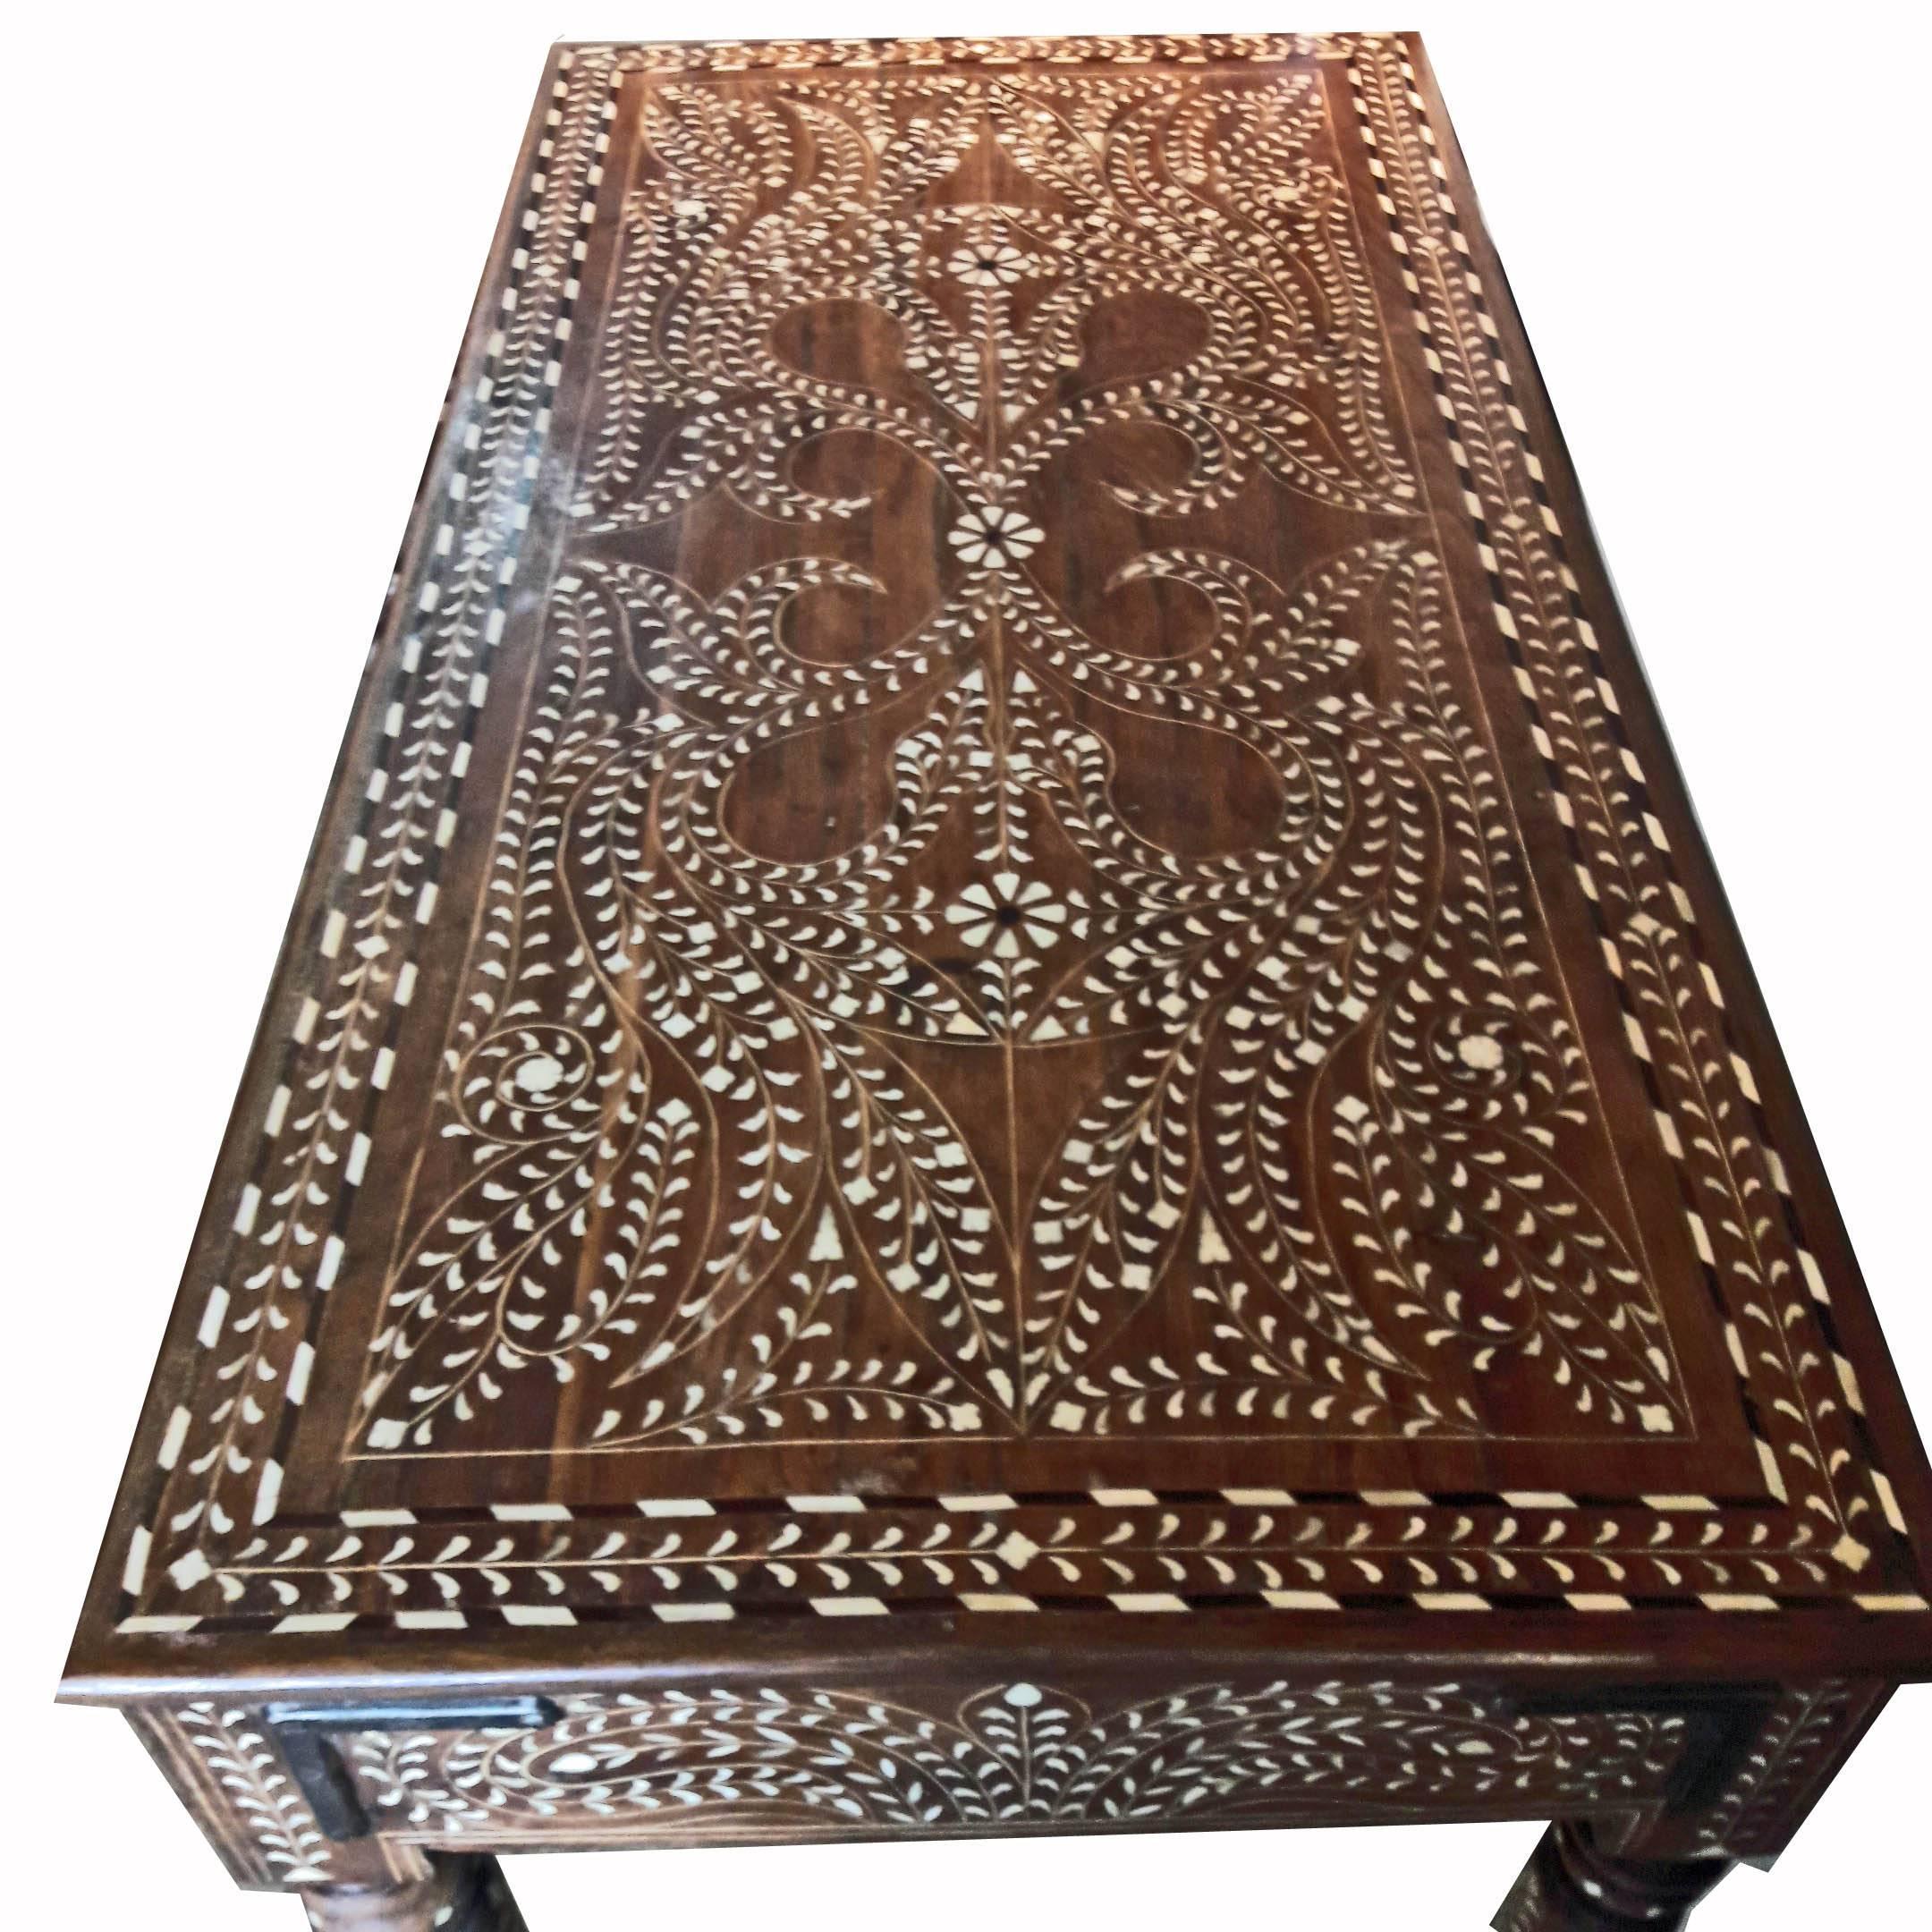 A traditional Anglo-Indian desk / table from India. Bone-inlaid teak with an intricate, delicate design. Turned legs. Metal ring pulls, two drawers.